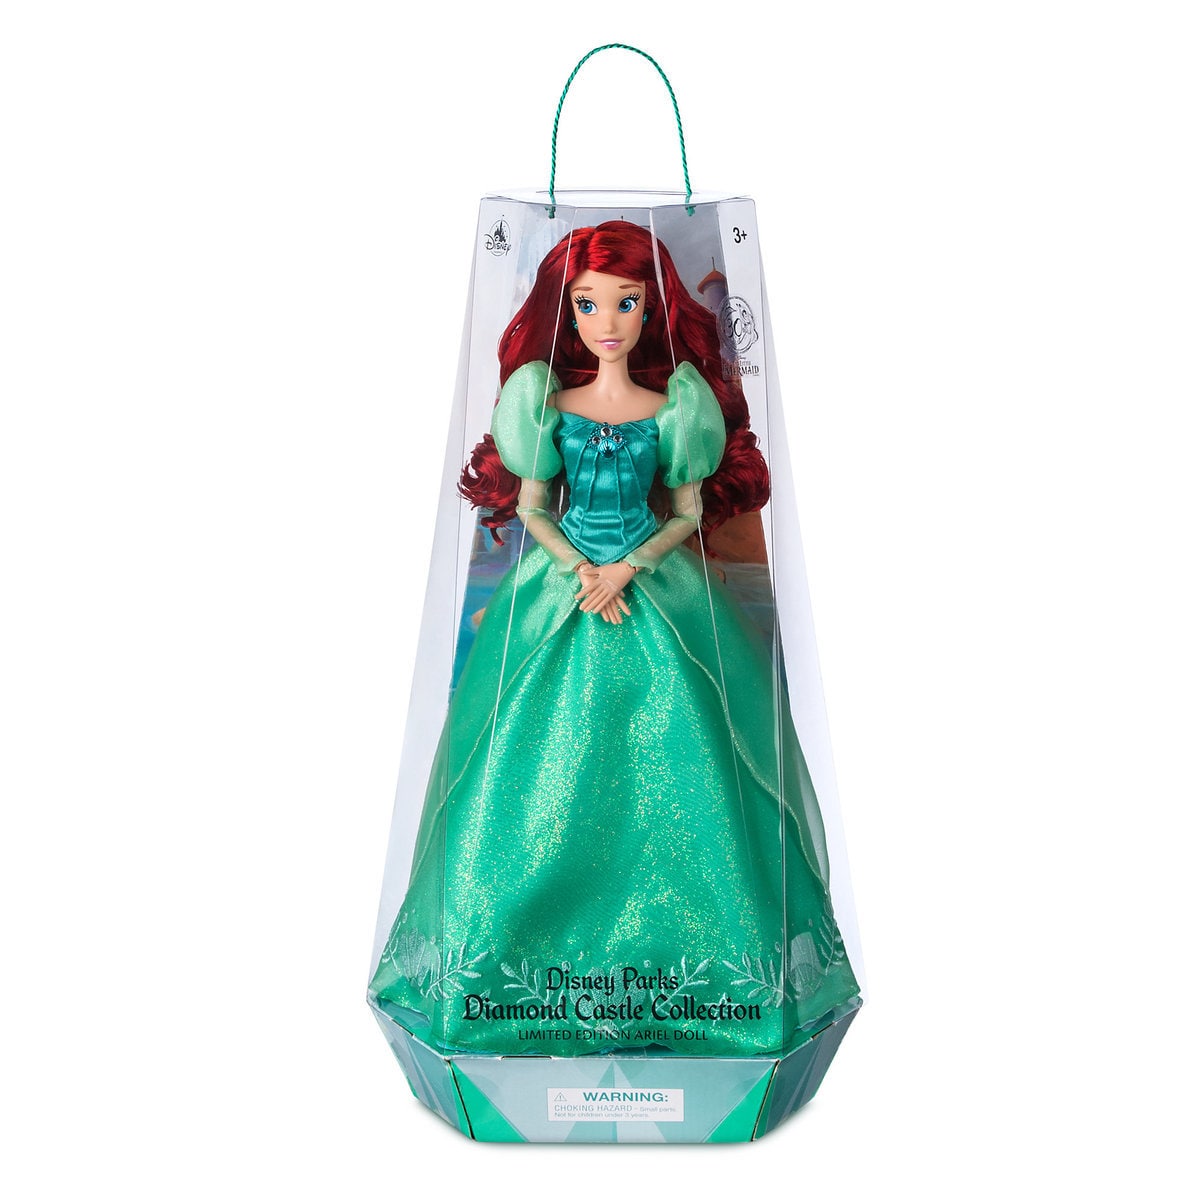 little mermaid collector doll